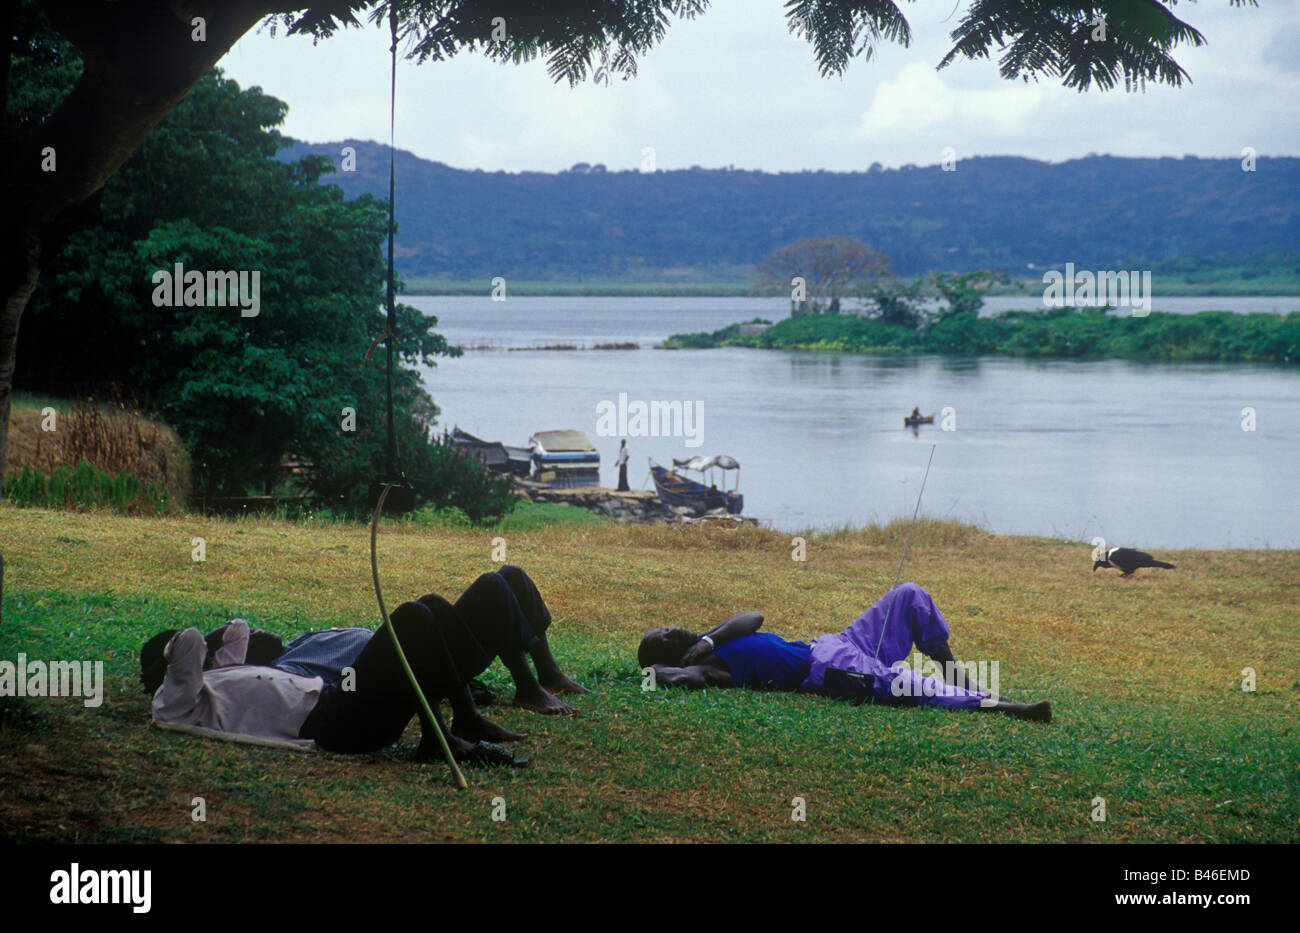 Fishing canoe on the Source of the Nile the location where Speke first  sighted the Source of the Nile in 1862 Jinja Uganda Stock Photo - Alamy